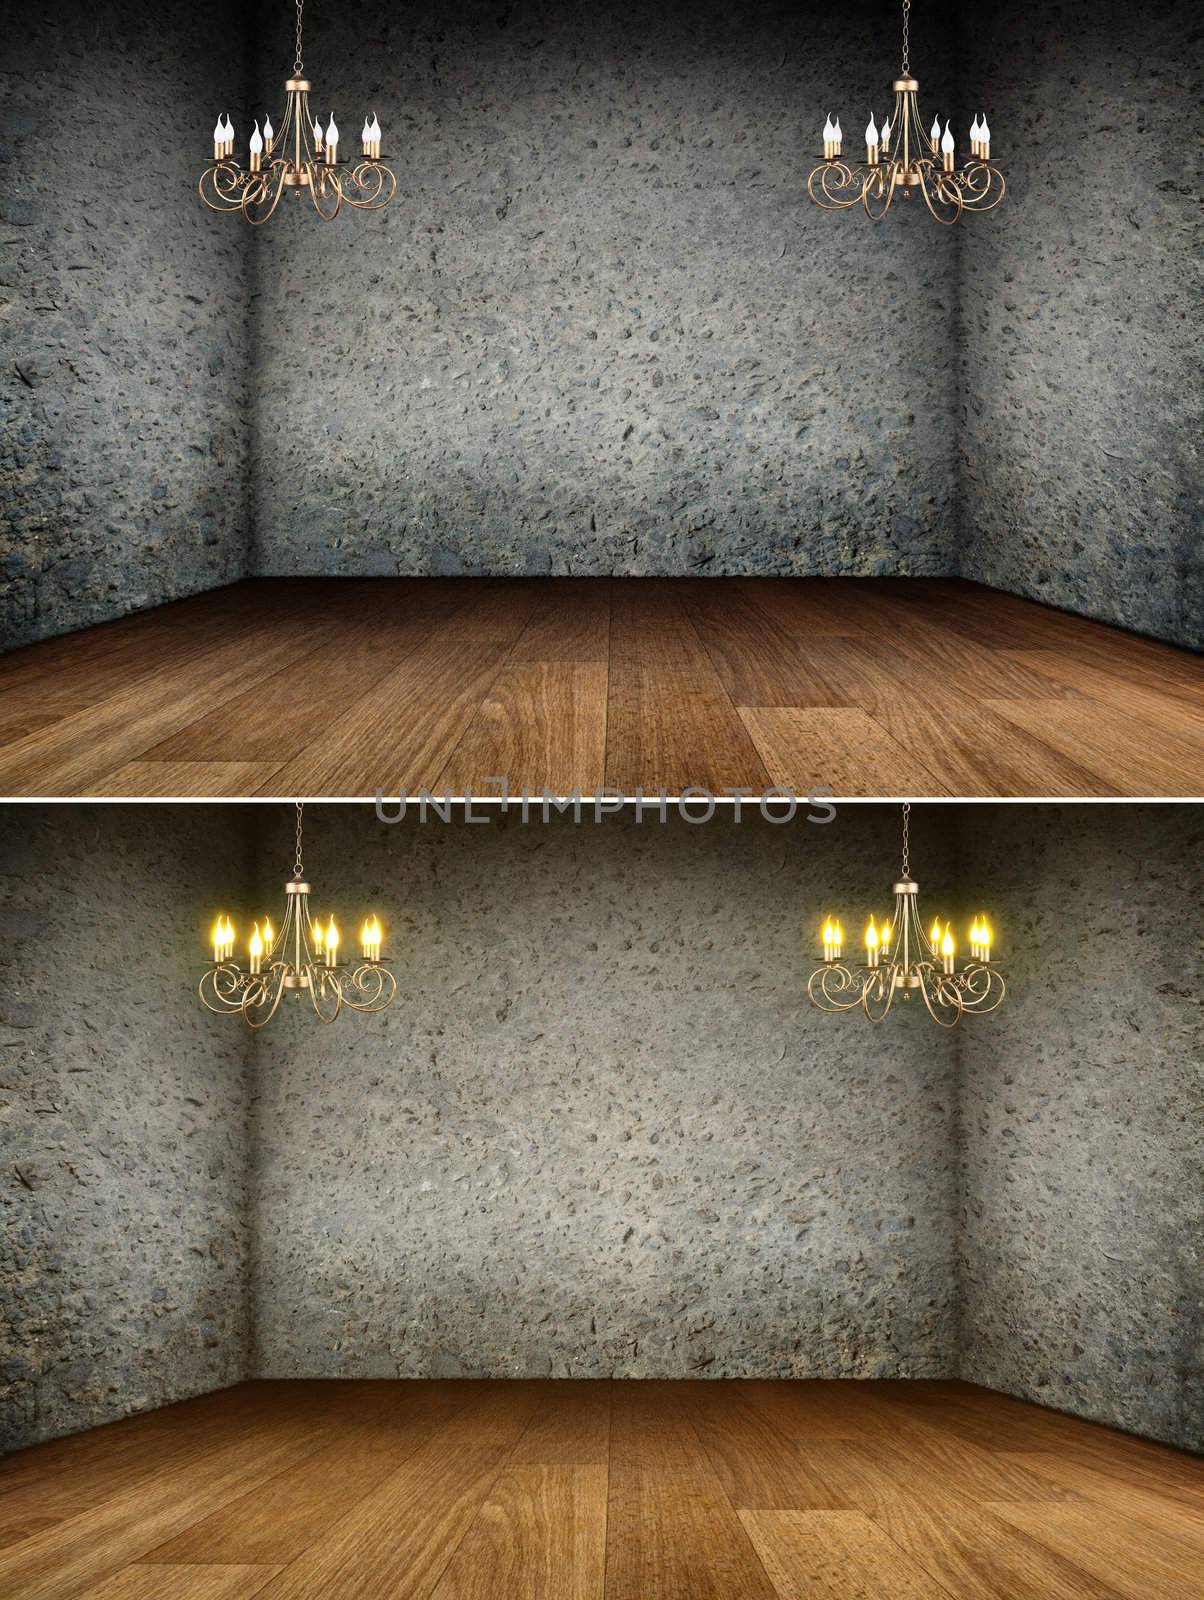 Vintage chandeliers shining in aged inetior. Wooden parquet and concrete walls at the backround